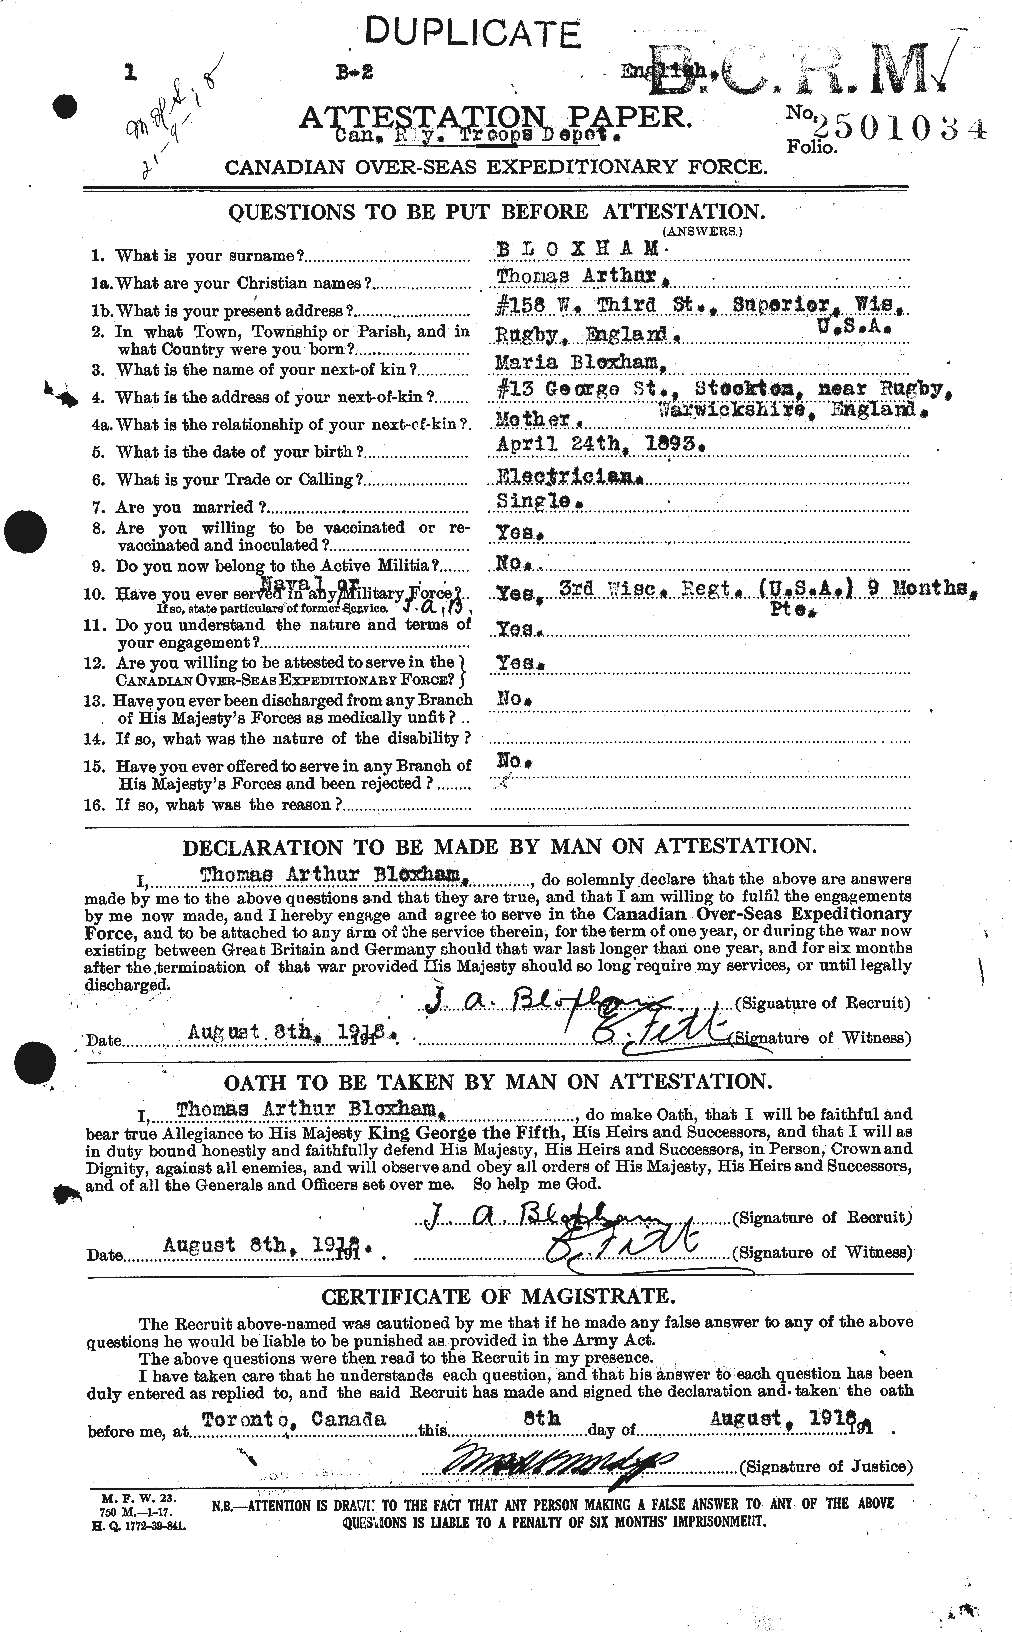 Personnel Records of the First World War - CEF 247110a